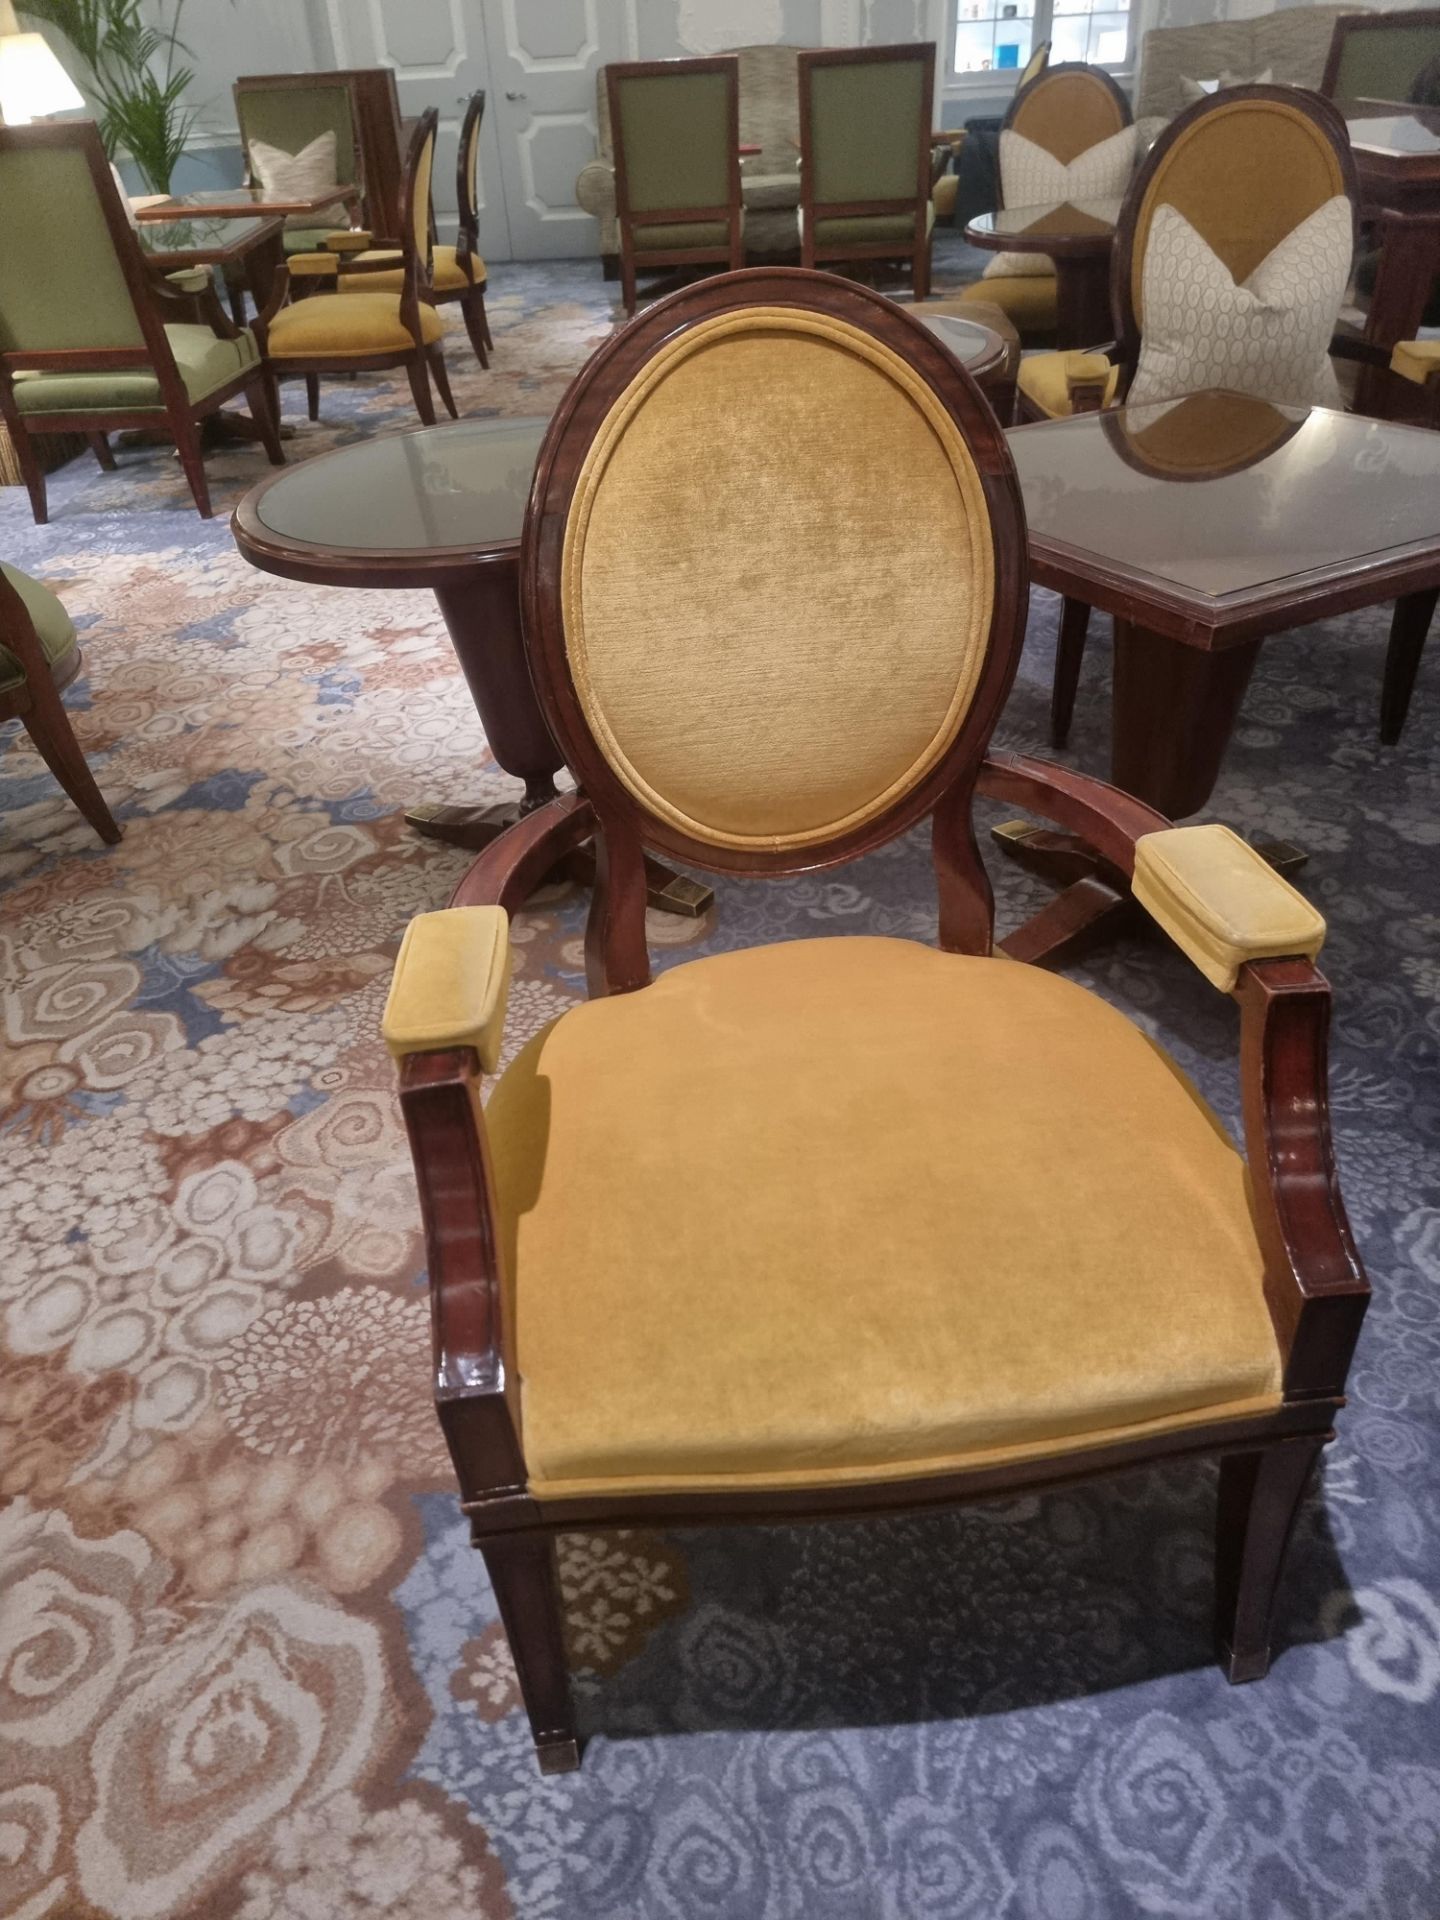 Louis XVI Style Framed And Upholstered In Gold Velvet Arm Chair 68 x 68 x 105cm - Image 5 of 7